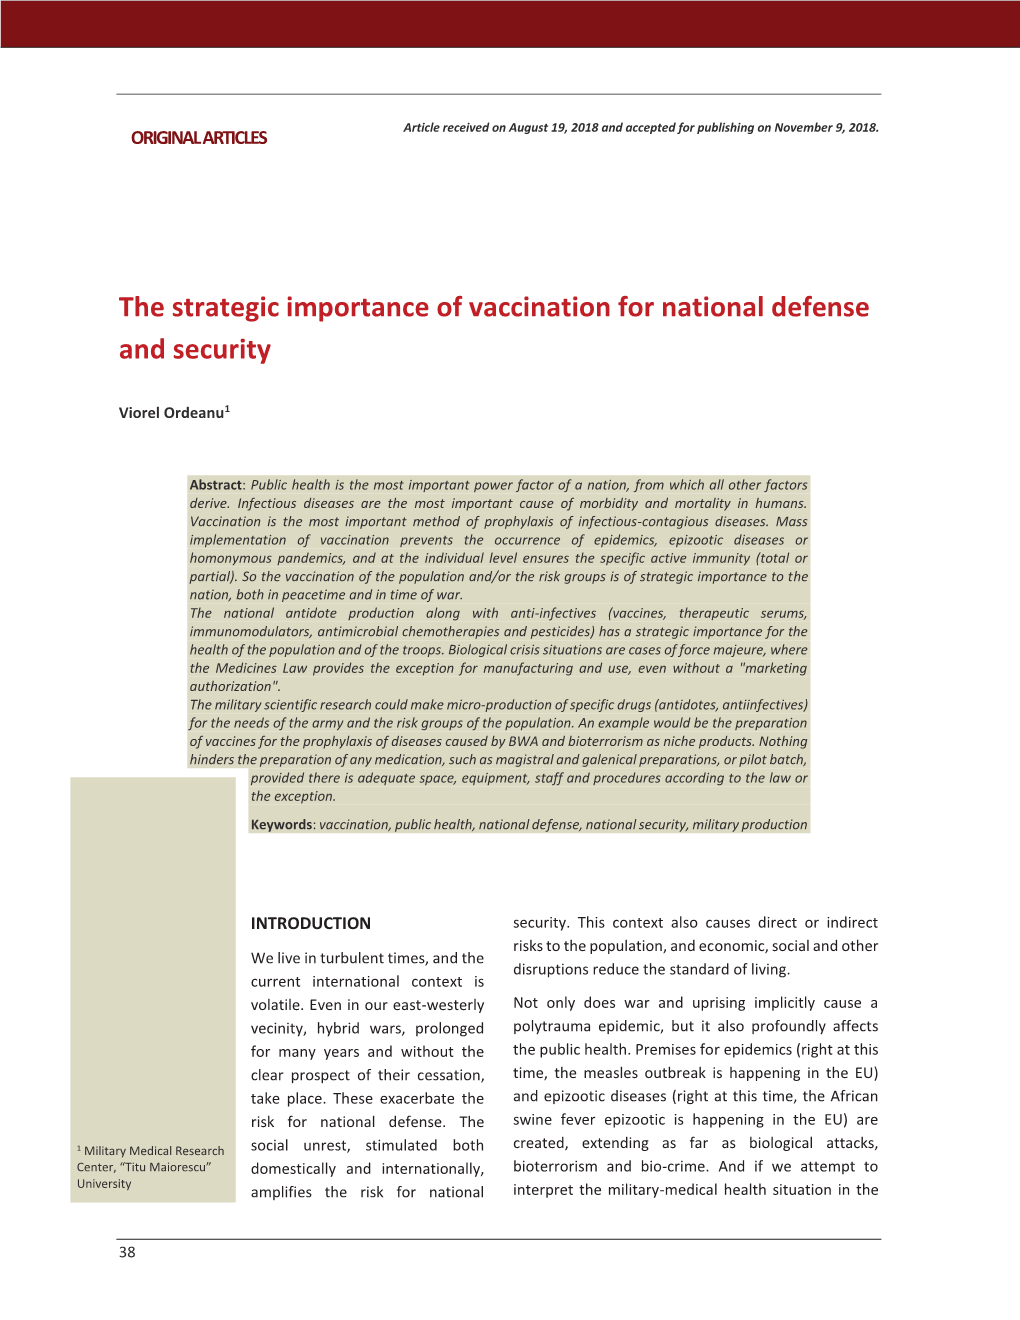 The Strategic Importance of Vaccination for National Defense and Security